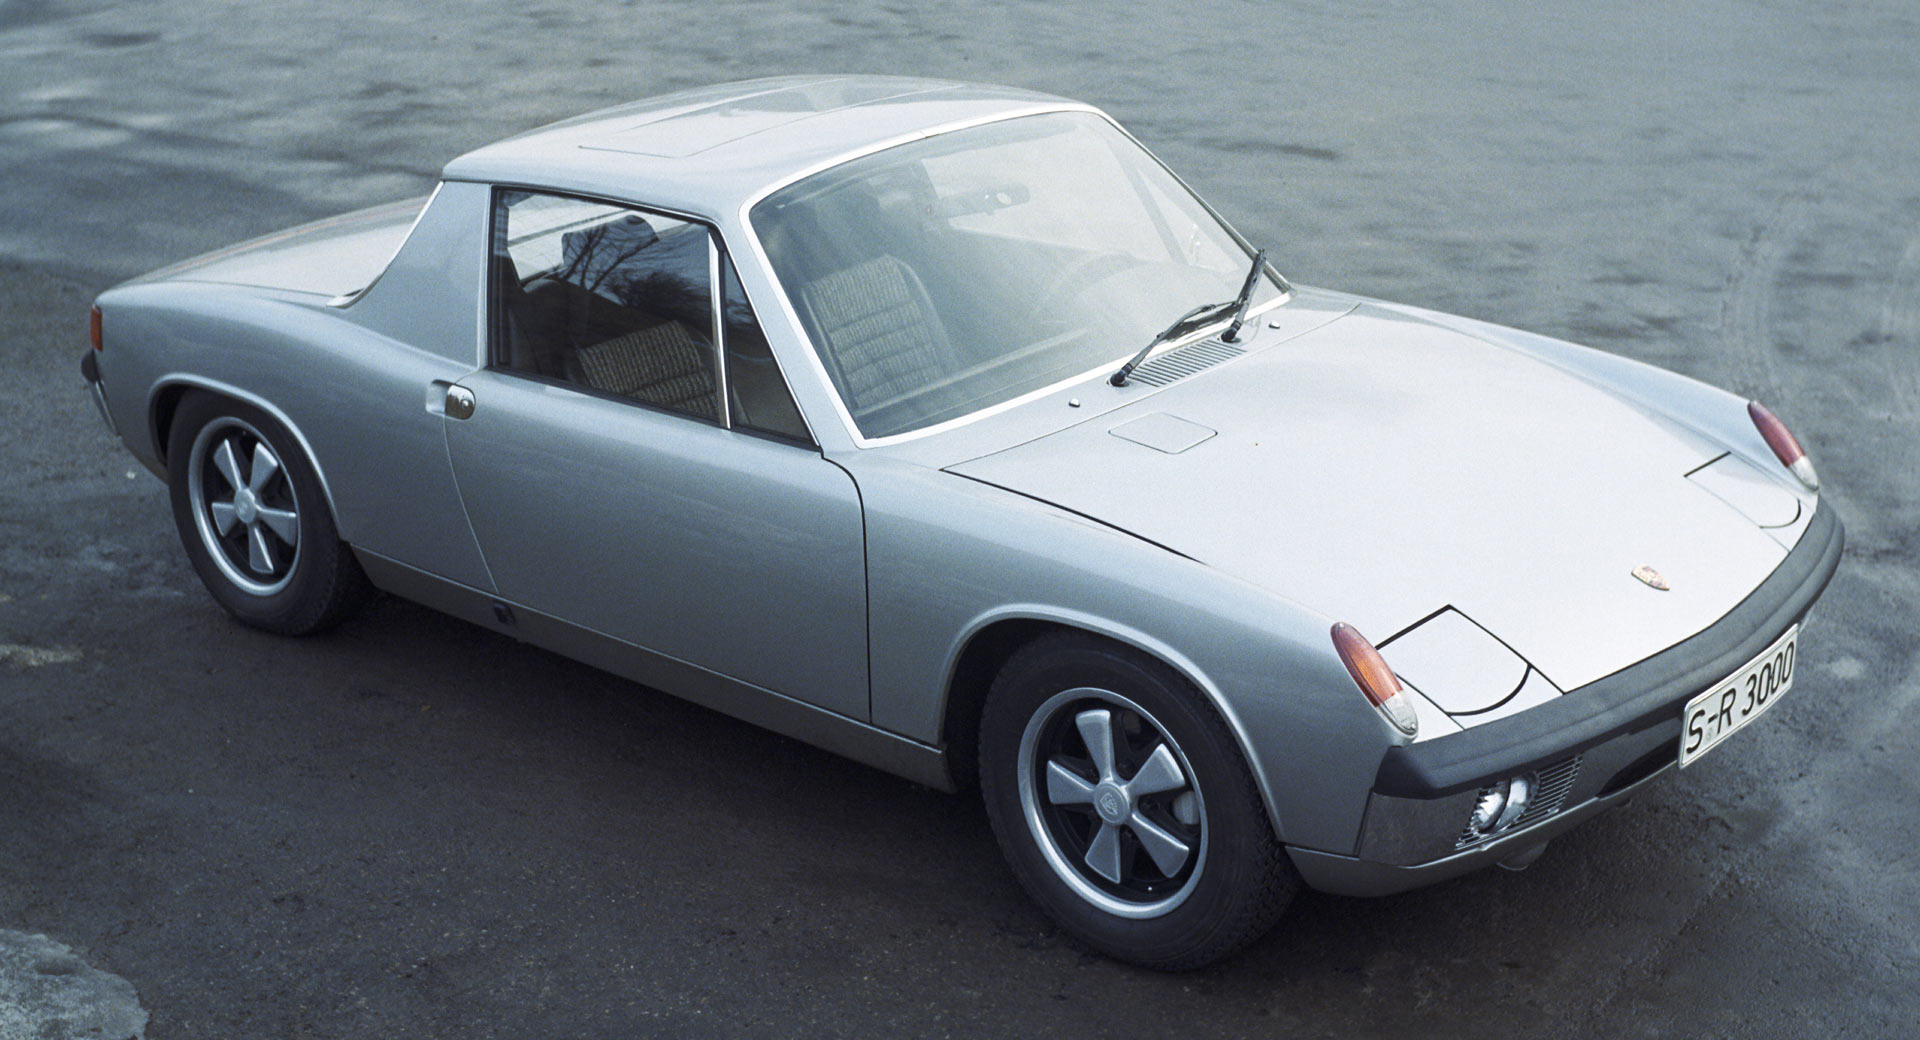 Porsche Celebrates The 50th Anniversary Of The 914 By Taking